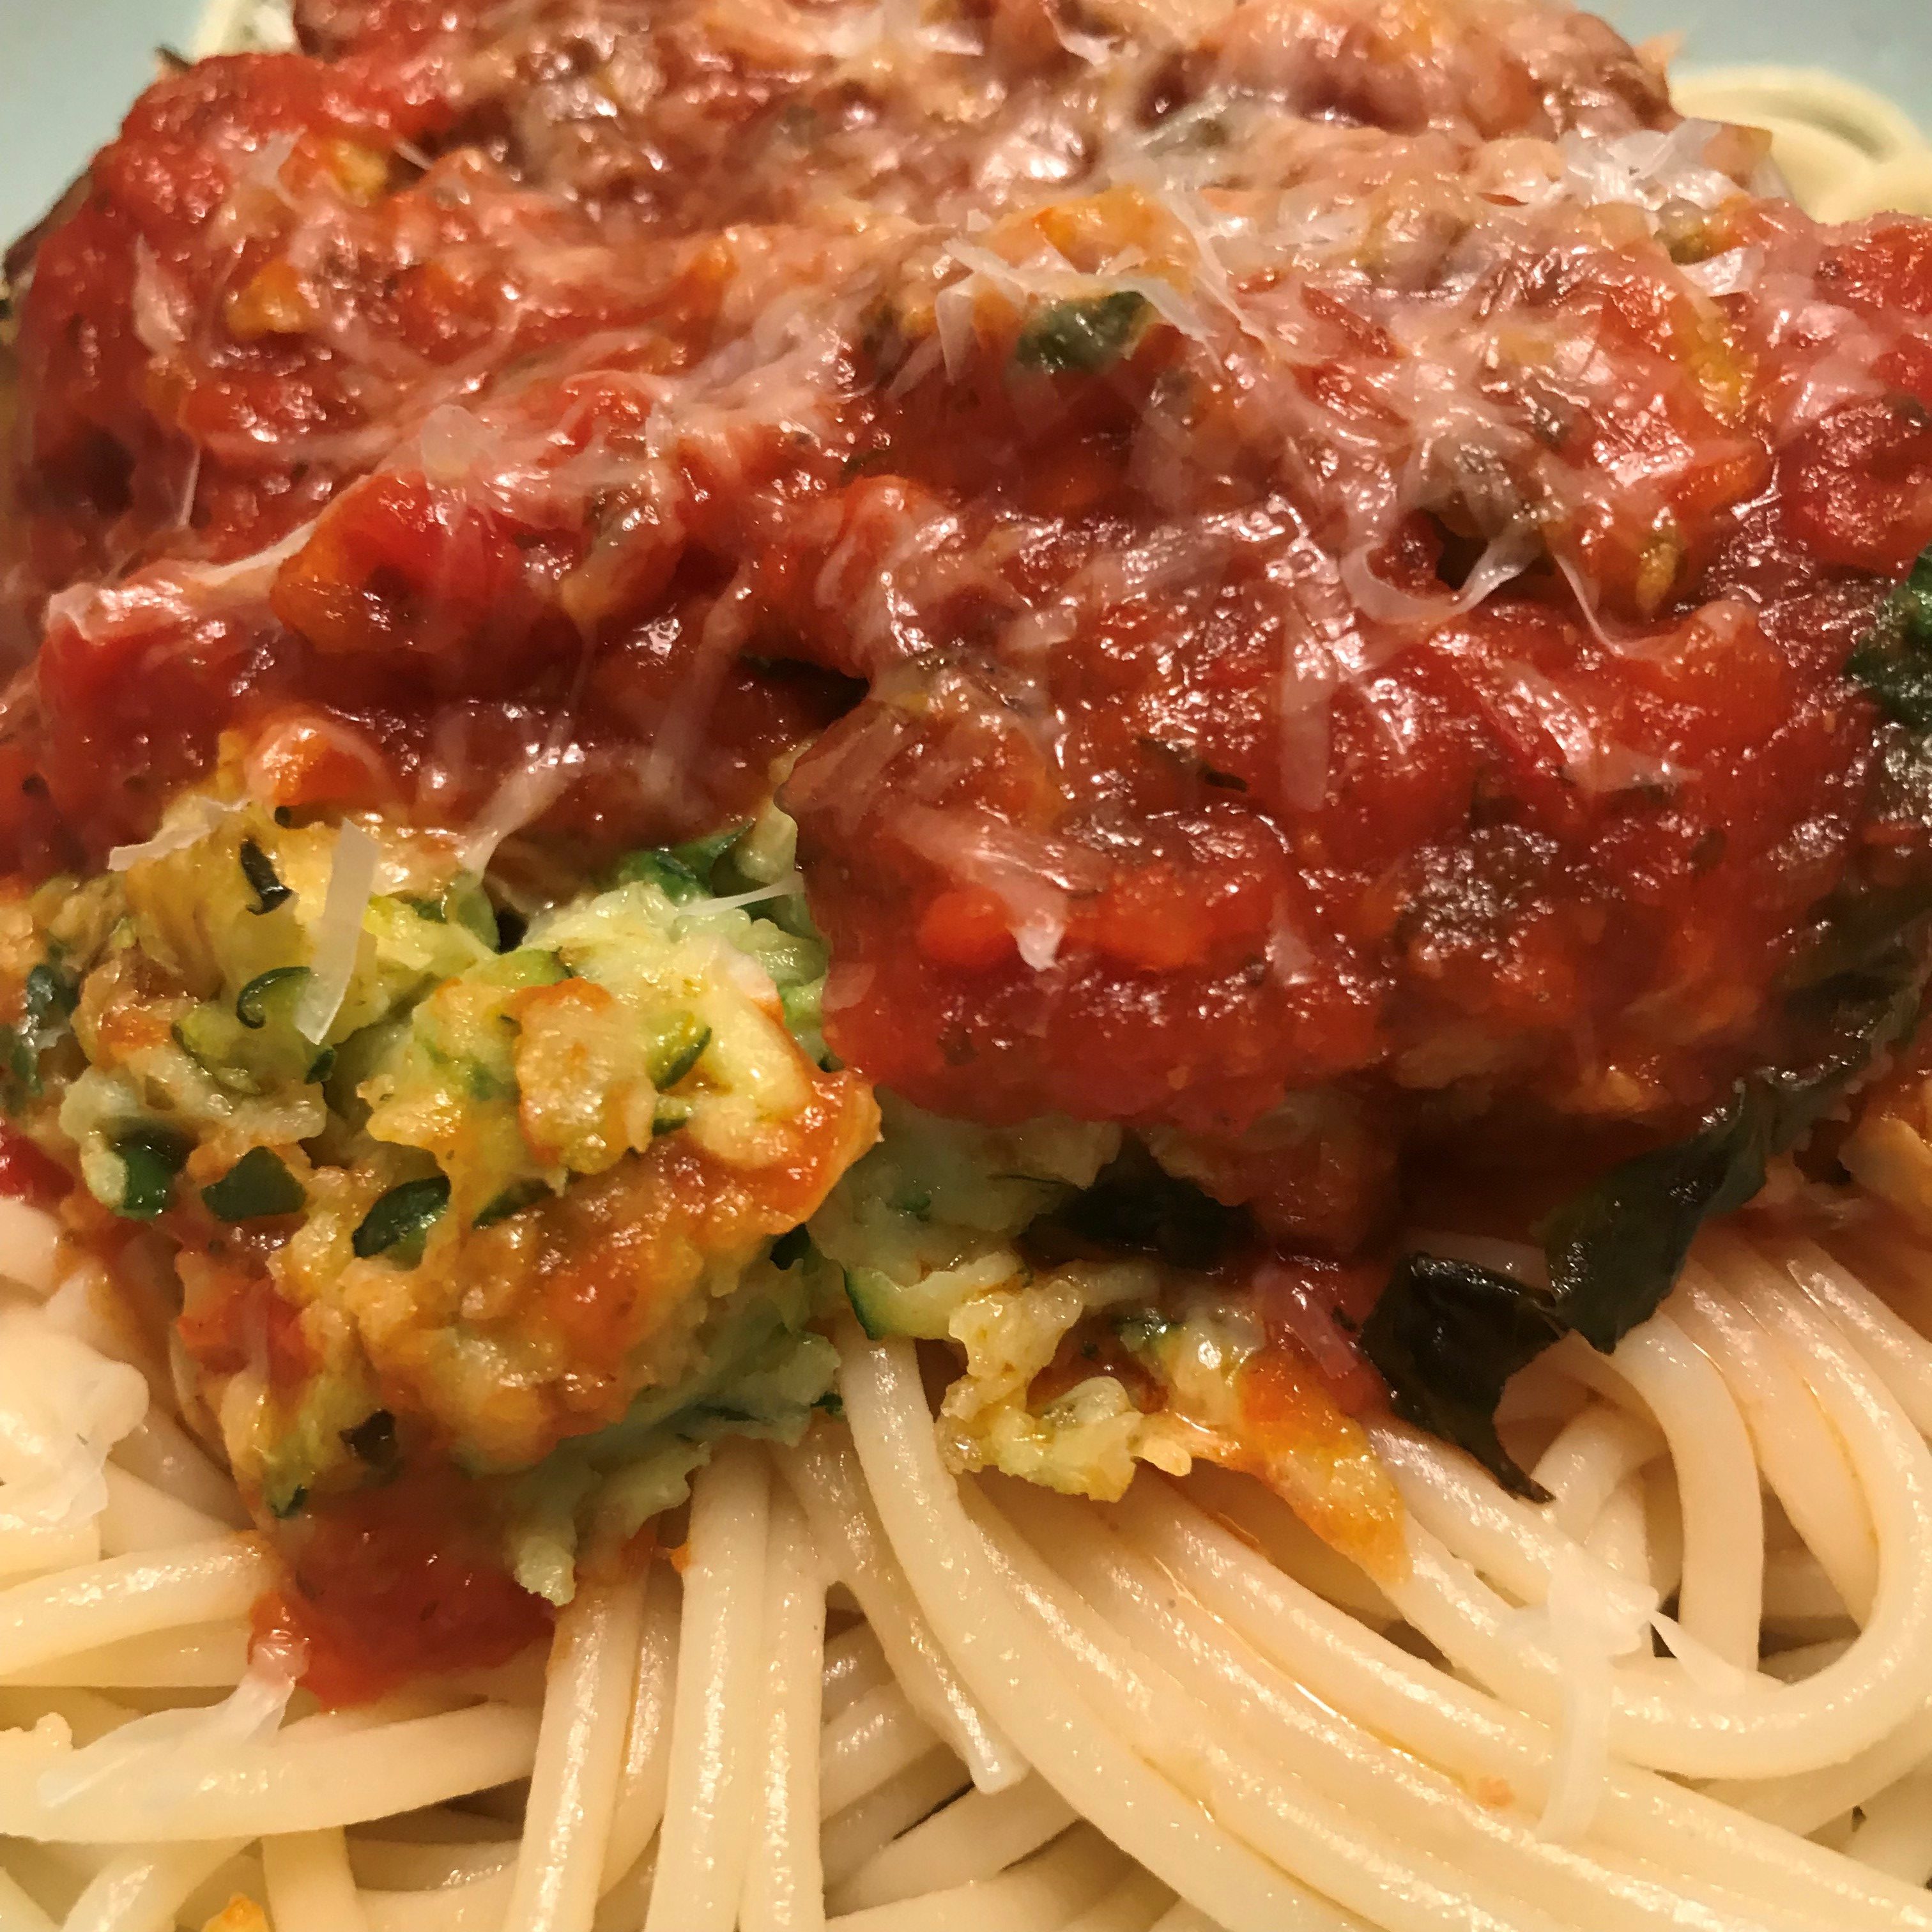 Close-up view of zucchini meatballs, a red sauce, on top of spaghetti noodles